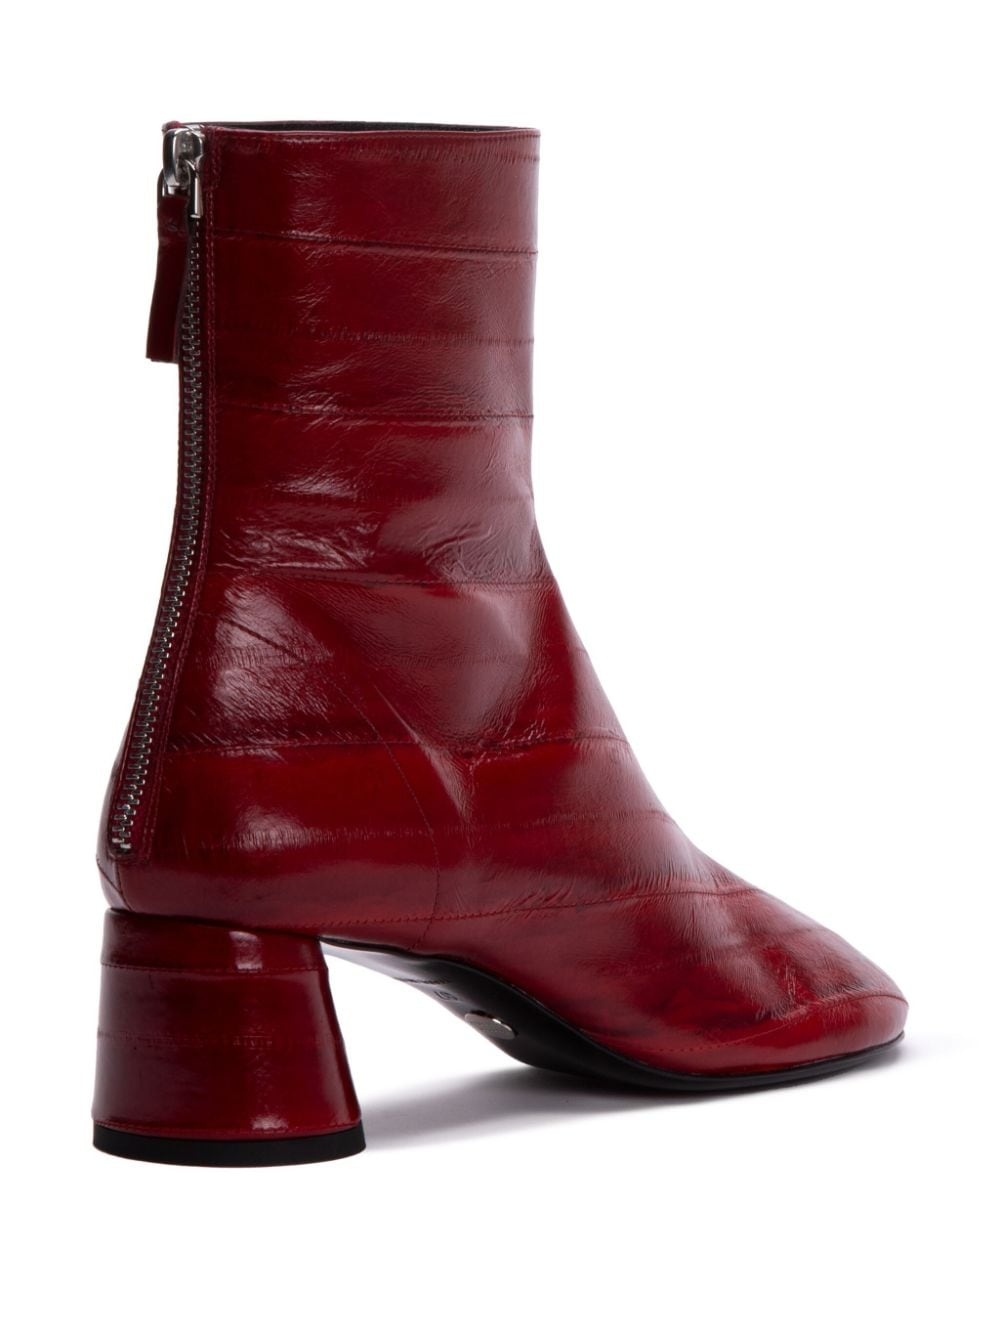 Glove leather boots - 3